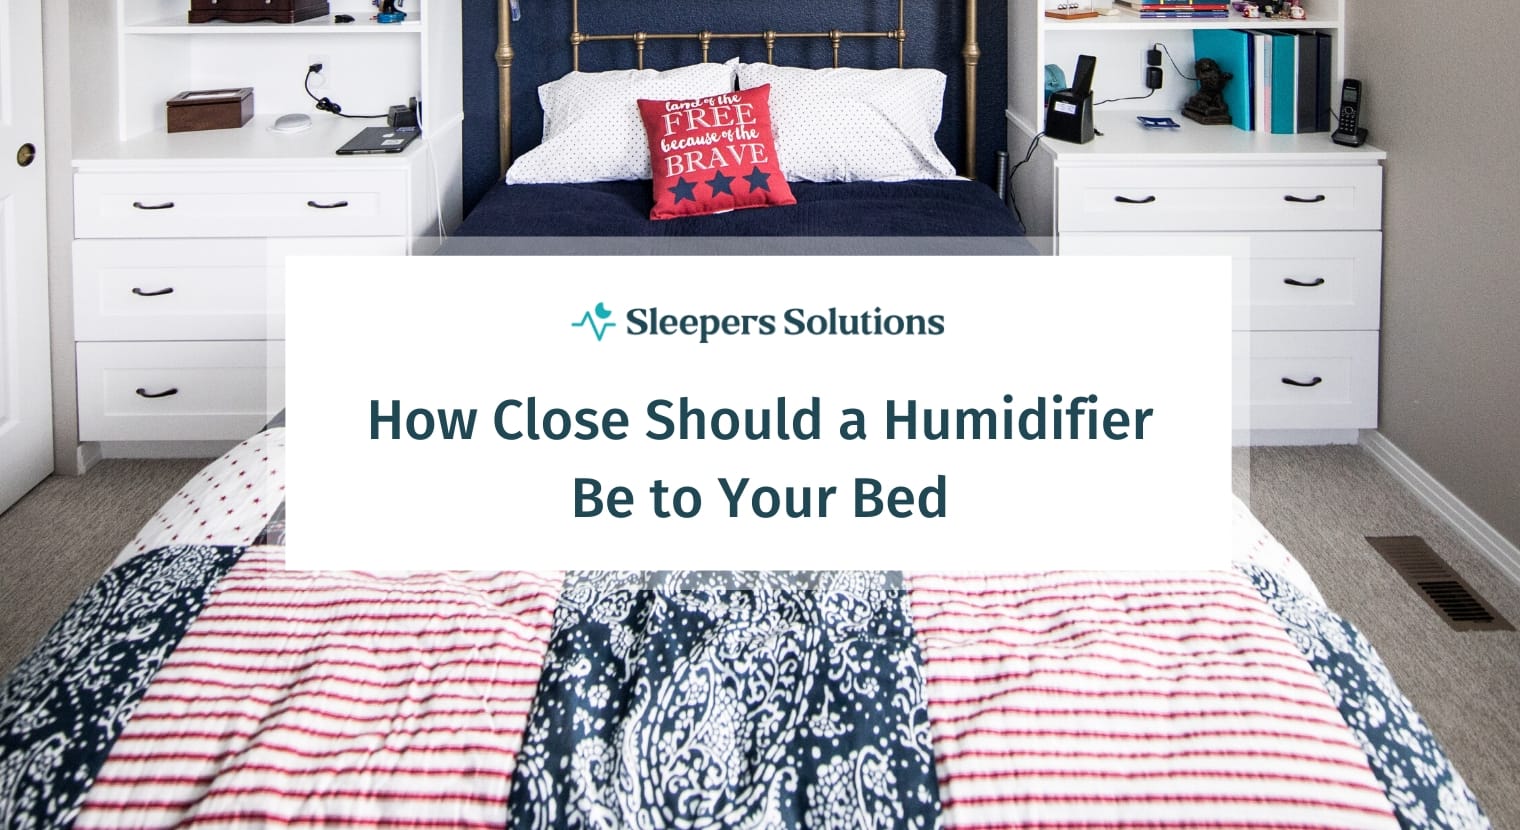 How Close Should a Humidifier Be to Your Bed